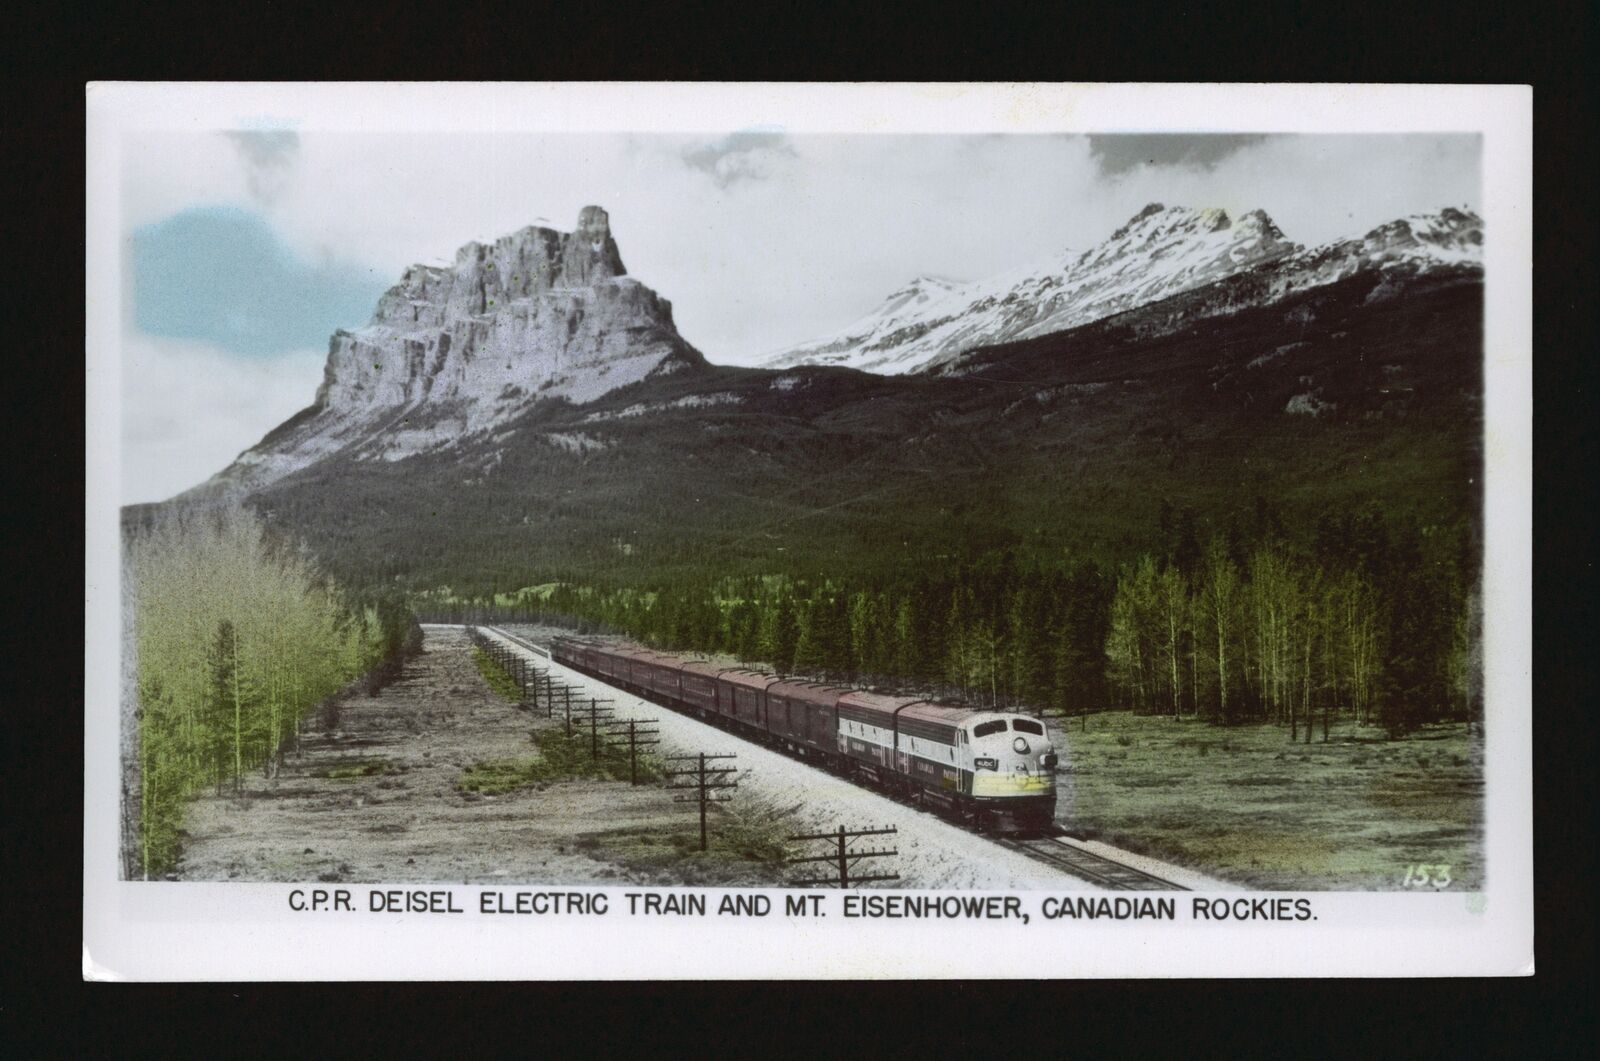 CPR Deisel electric train and Mt Eisenhower Canadian Rockies - Ste- Old Photo